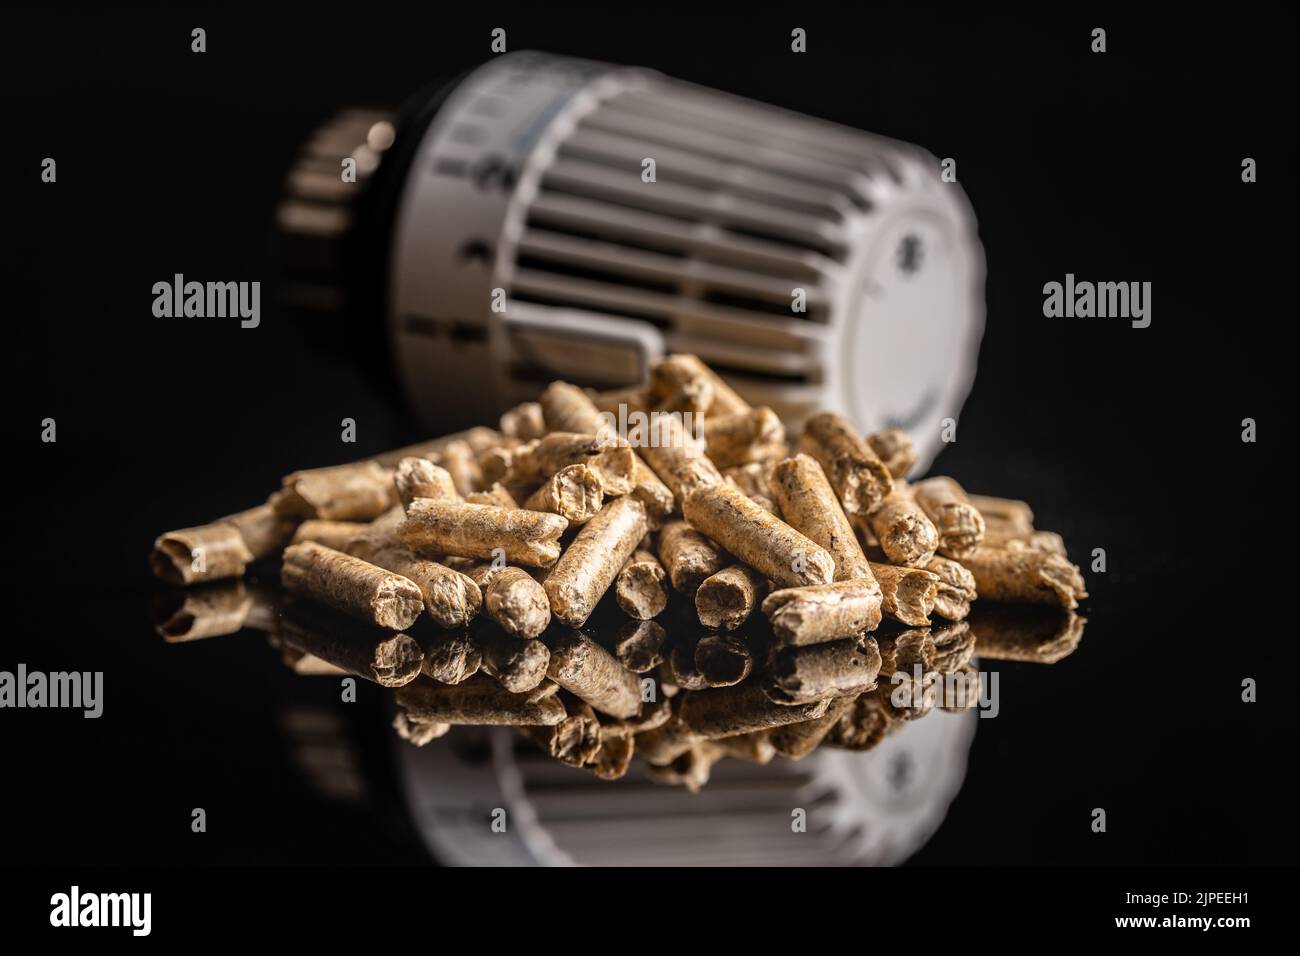 Wooden pellets and thermostatic valve head on black background. Biomass - Renewable source of heating. Stock Photo